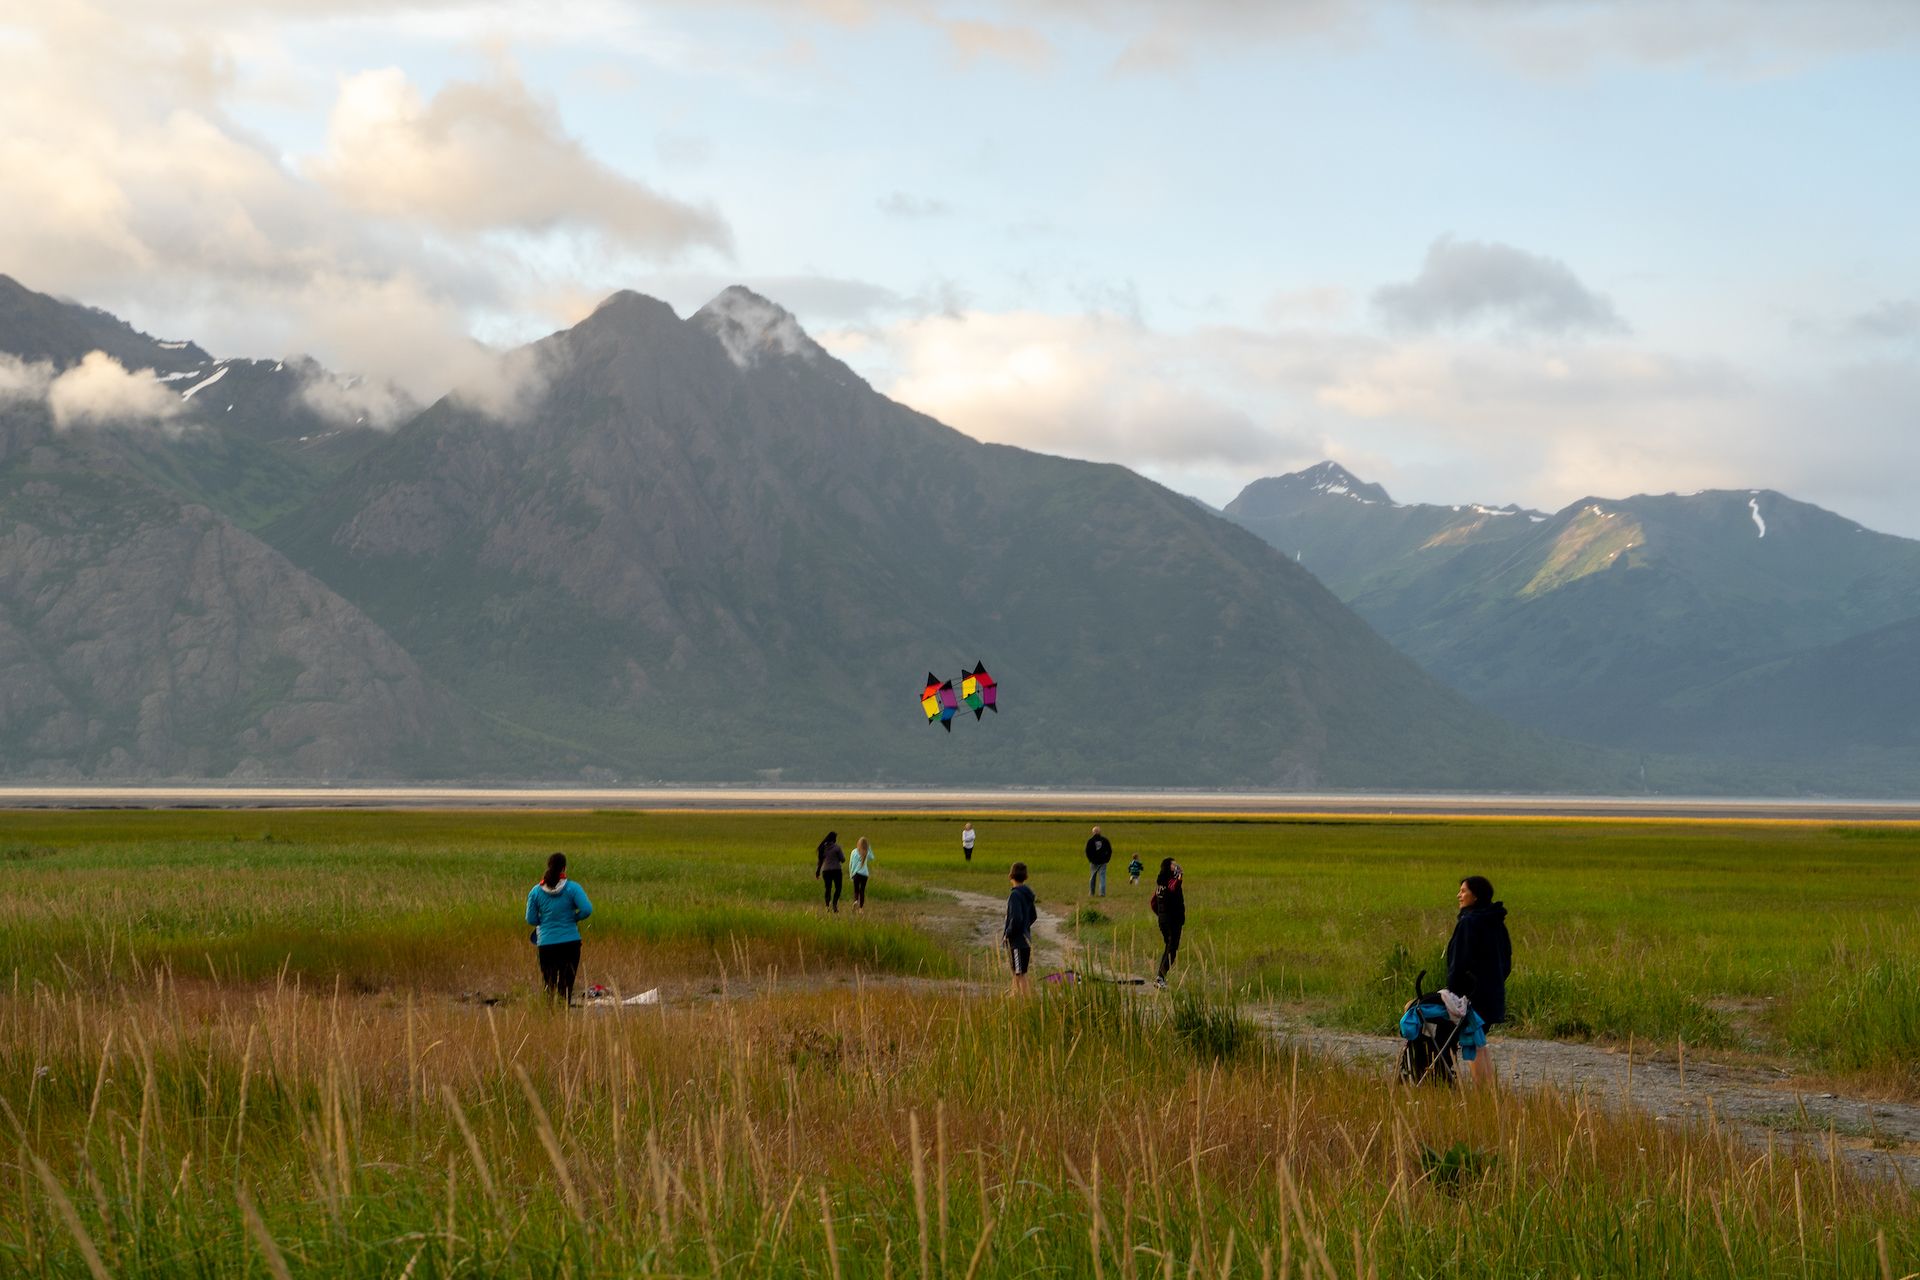 After dinner, we played with kites on the flats behind the restaurant